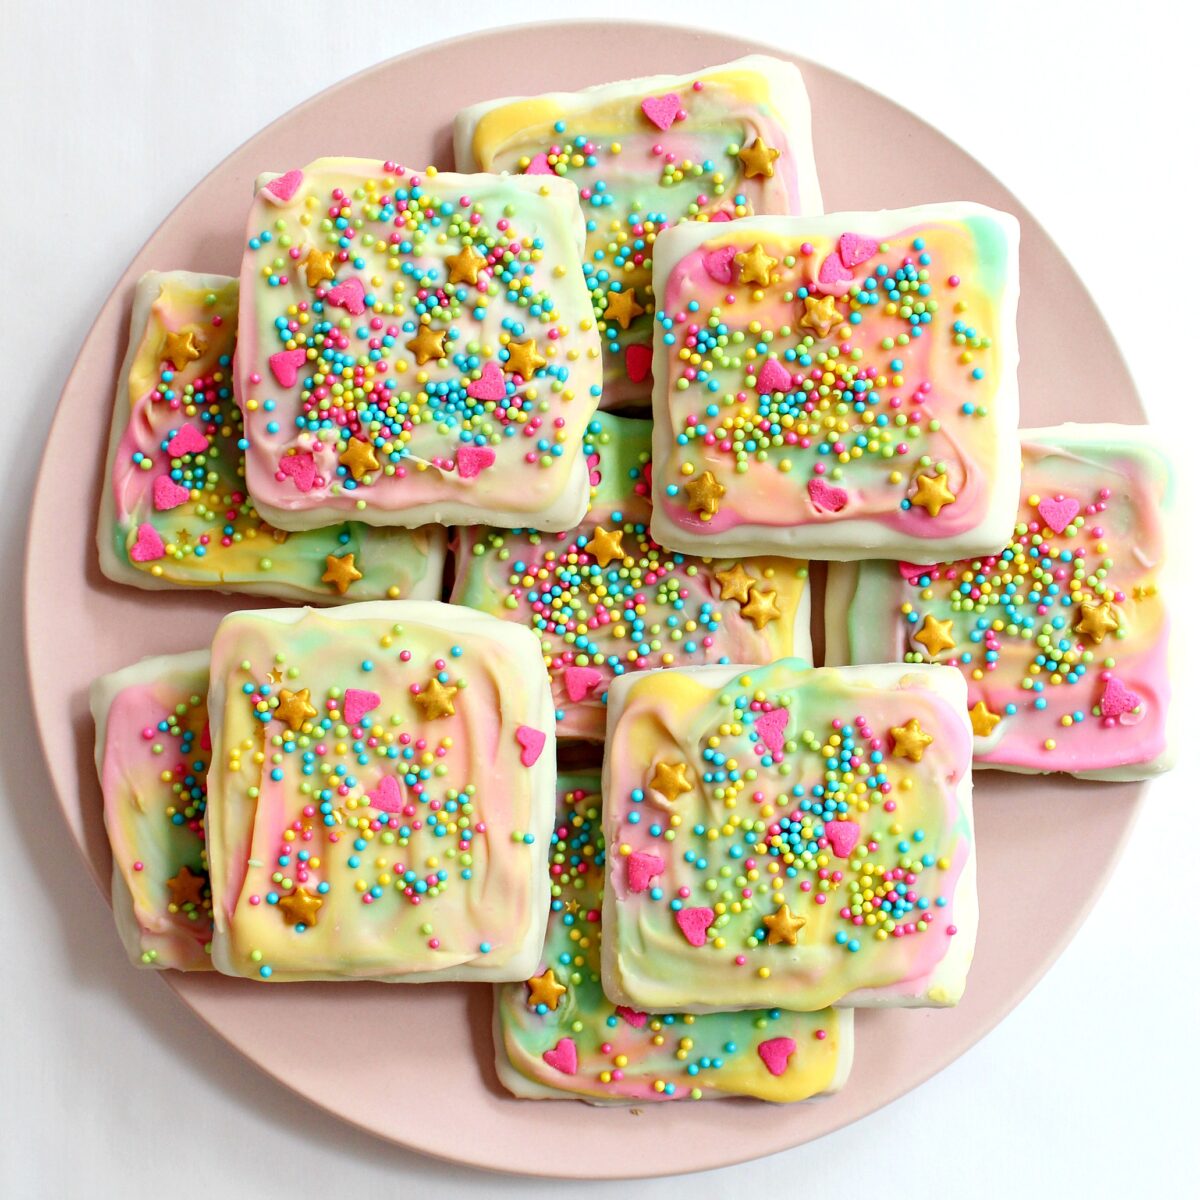 White Chocolate Covered Graham Crackers with sprinkles on a round, pink plate.